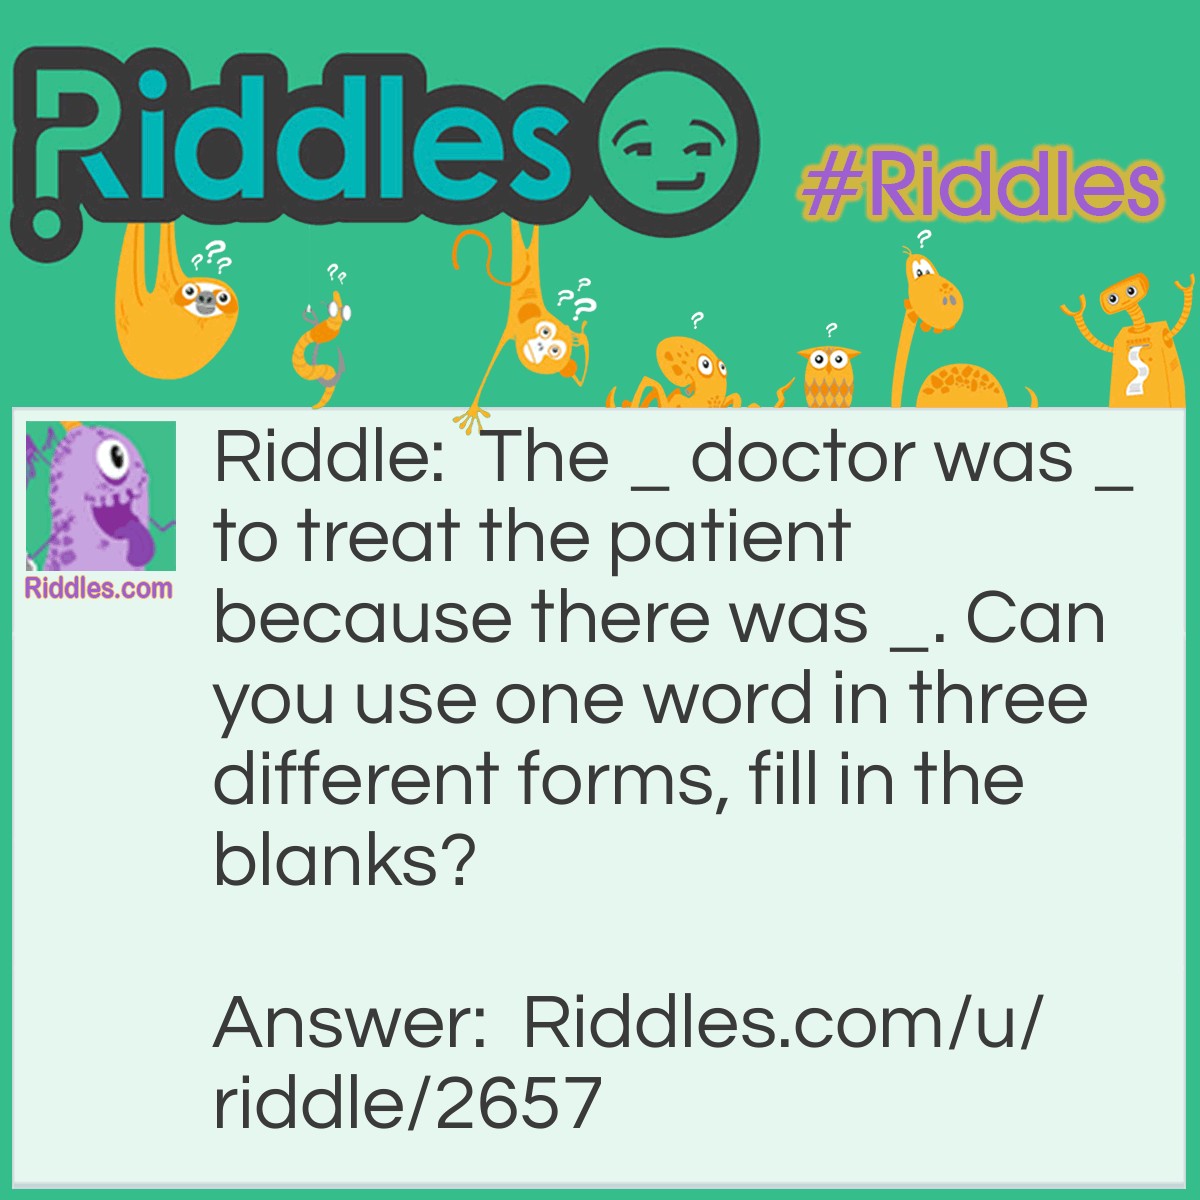 Riddle: The _ doctor was _ to treat the patient because there was _. Can you use one word in three different forms, fill in the blanks? Answer: The notable doctor was not able to treat the patient because there was no table.